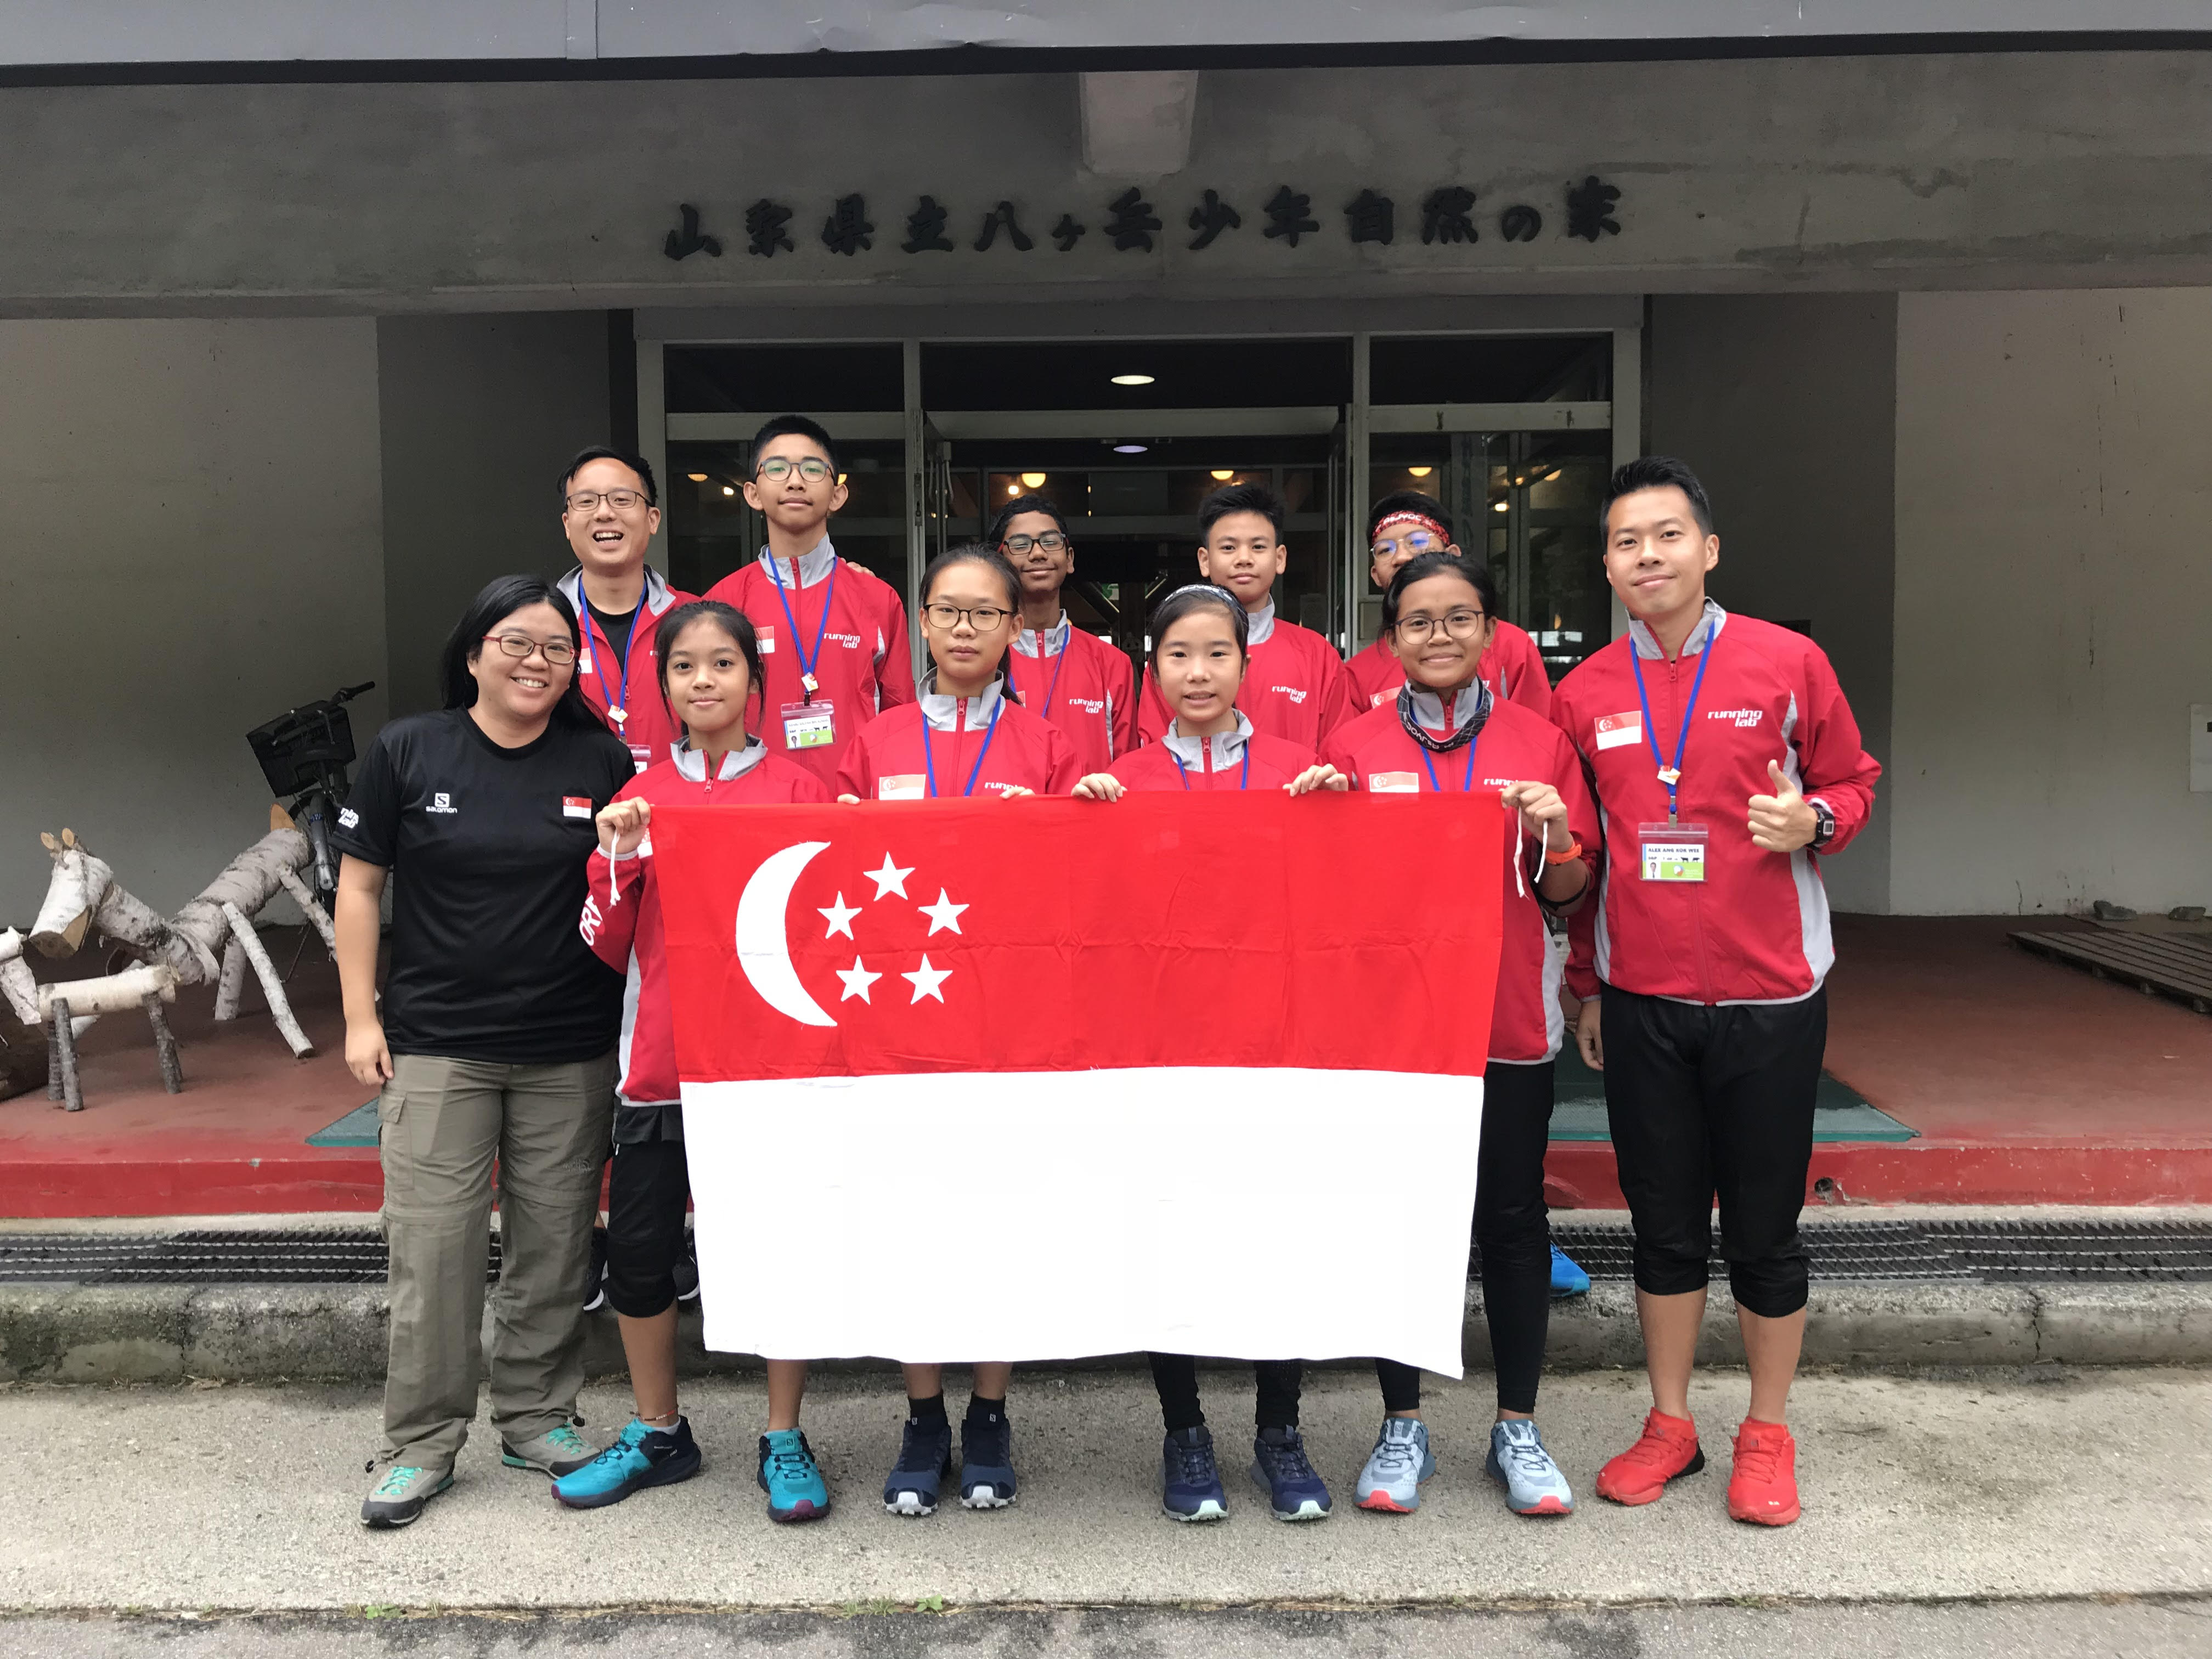 Mr Alex Ang (far right) with his students at the 3rd Asian Junior and Youth Orienteering Championships, held in Japan last year. (Photo taken before COVID-19.)